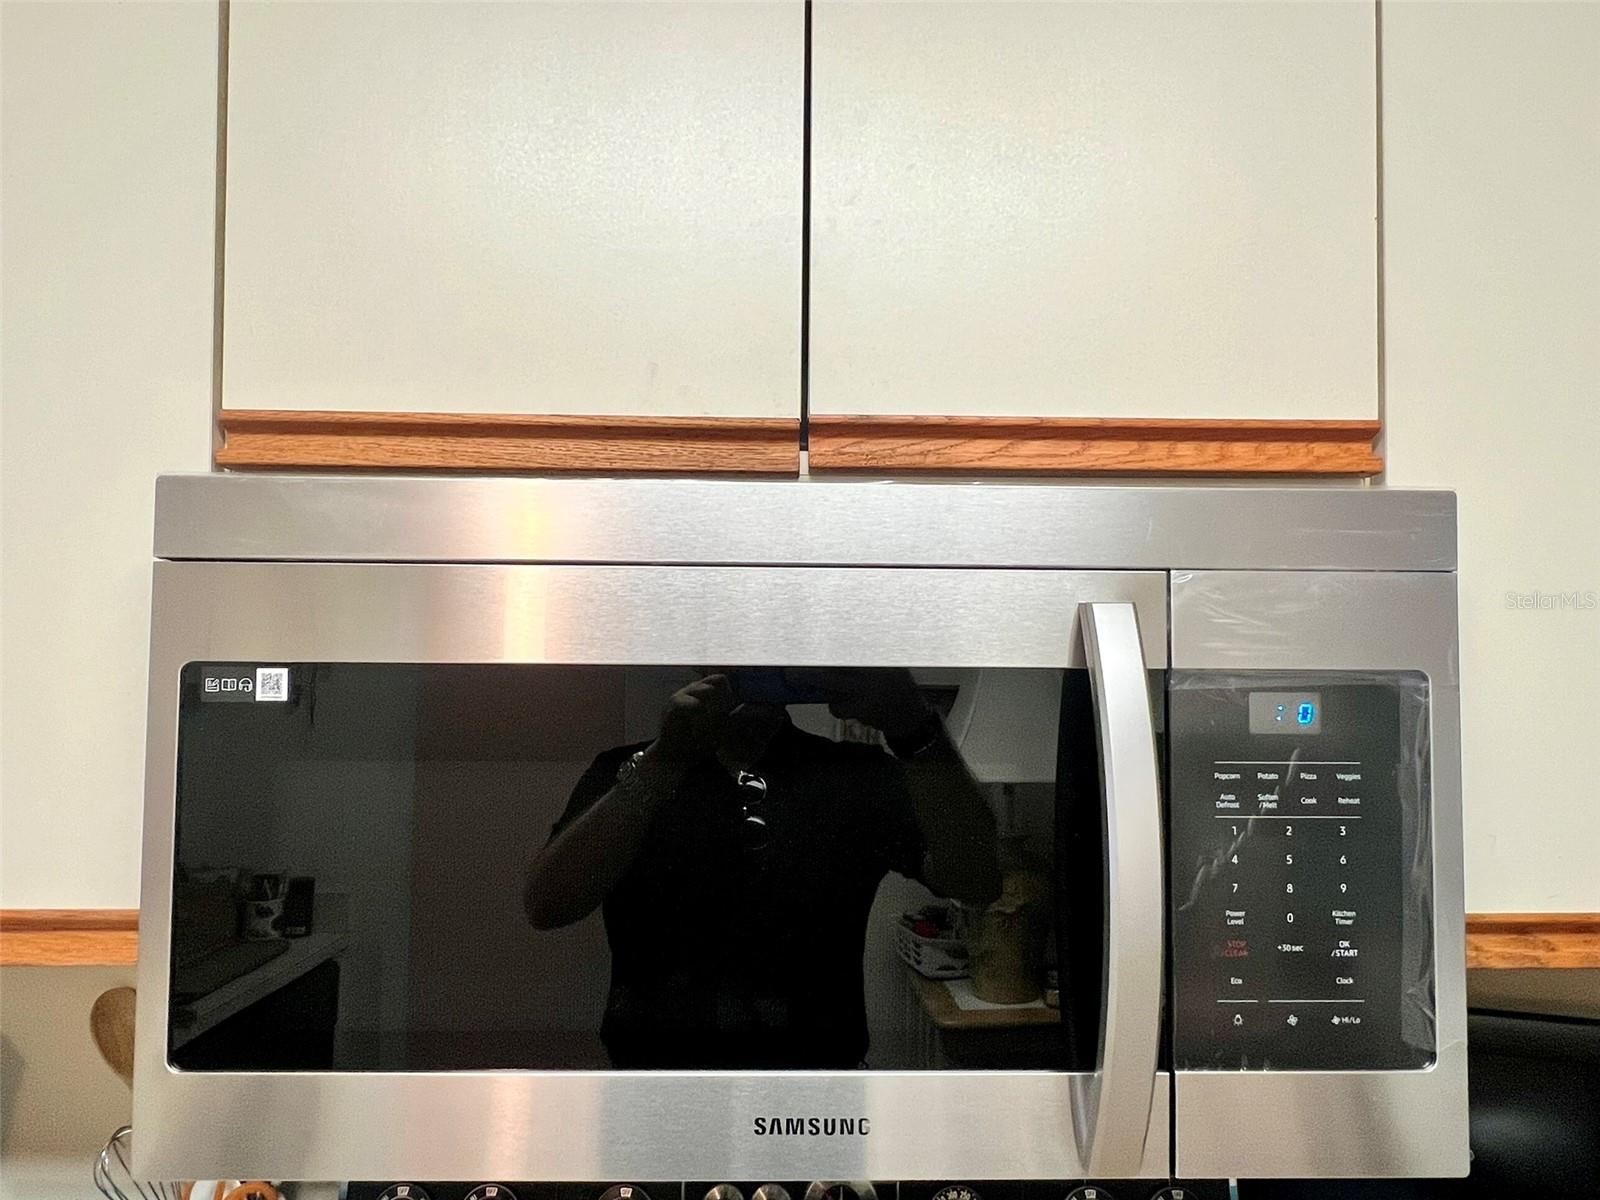 Brand new microwave just installed